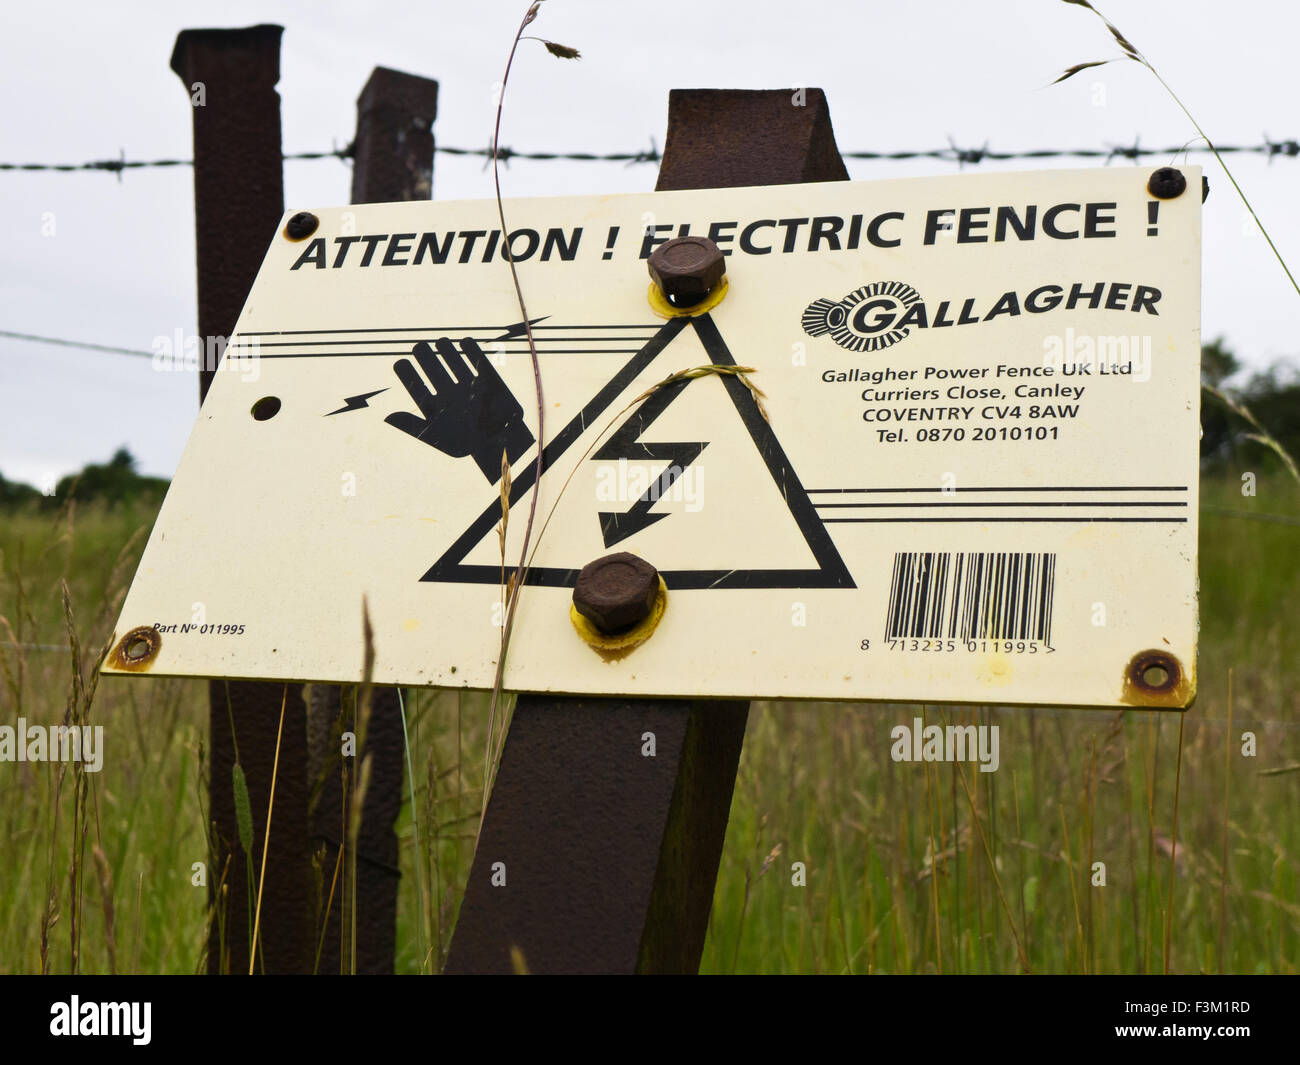 Warning sign for an electric fence. Stock Photo